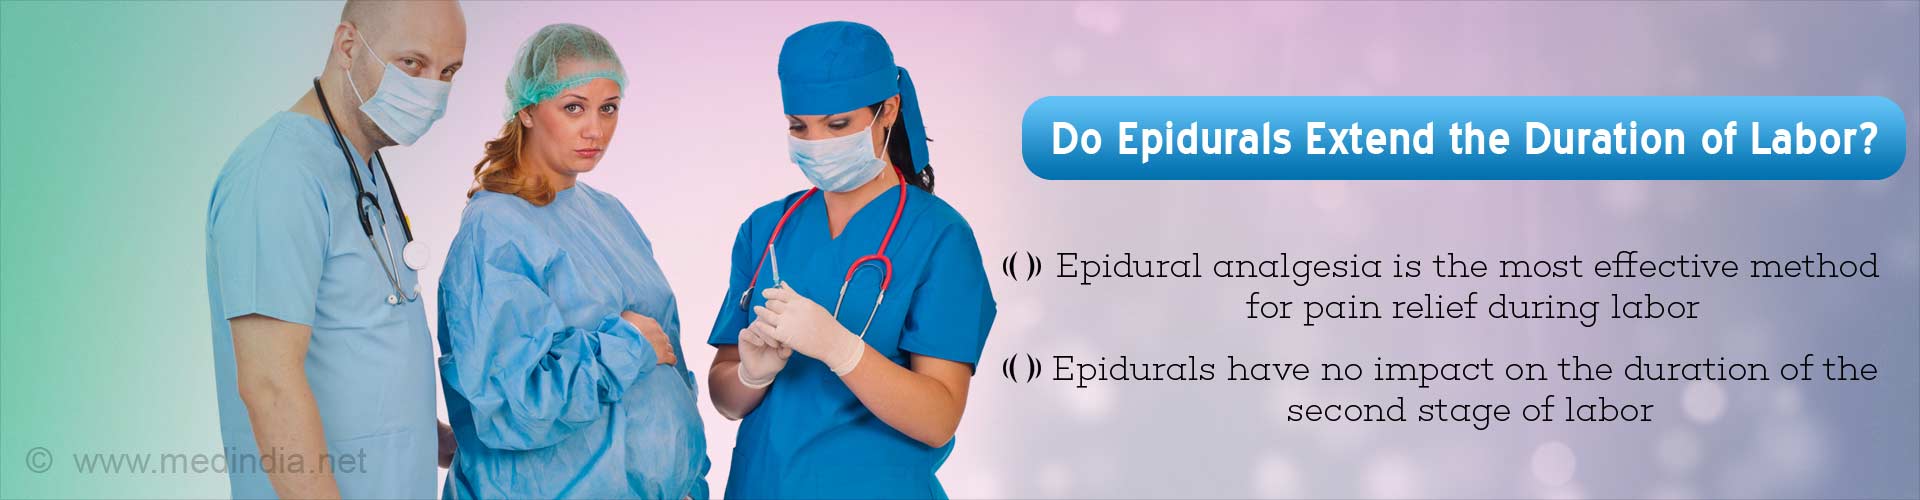 Do epidural extend the duration of labor?
- Epidural analgesia is the most effective method for pain relief during labor
- Epidurals have no impact on the duration of the second stage of labor